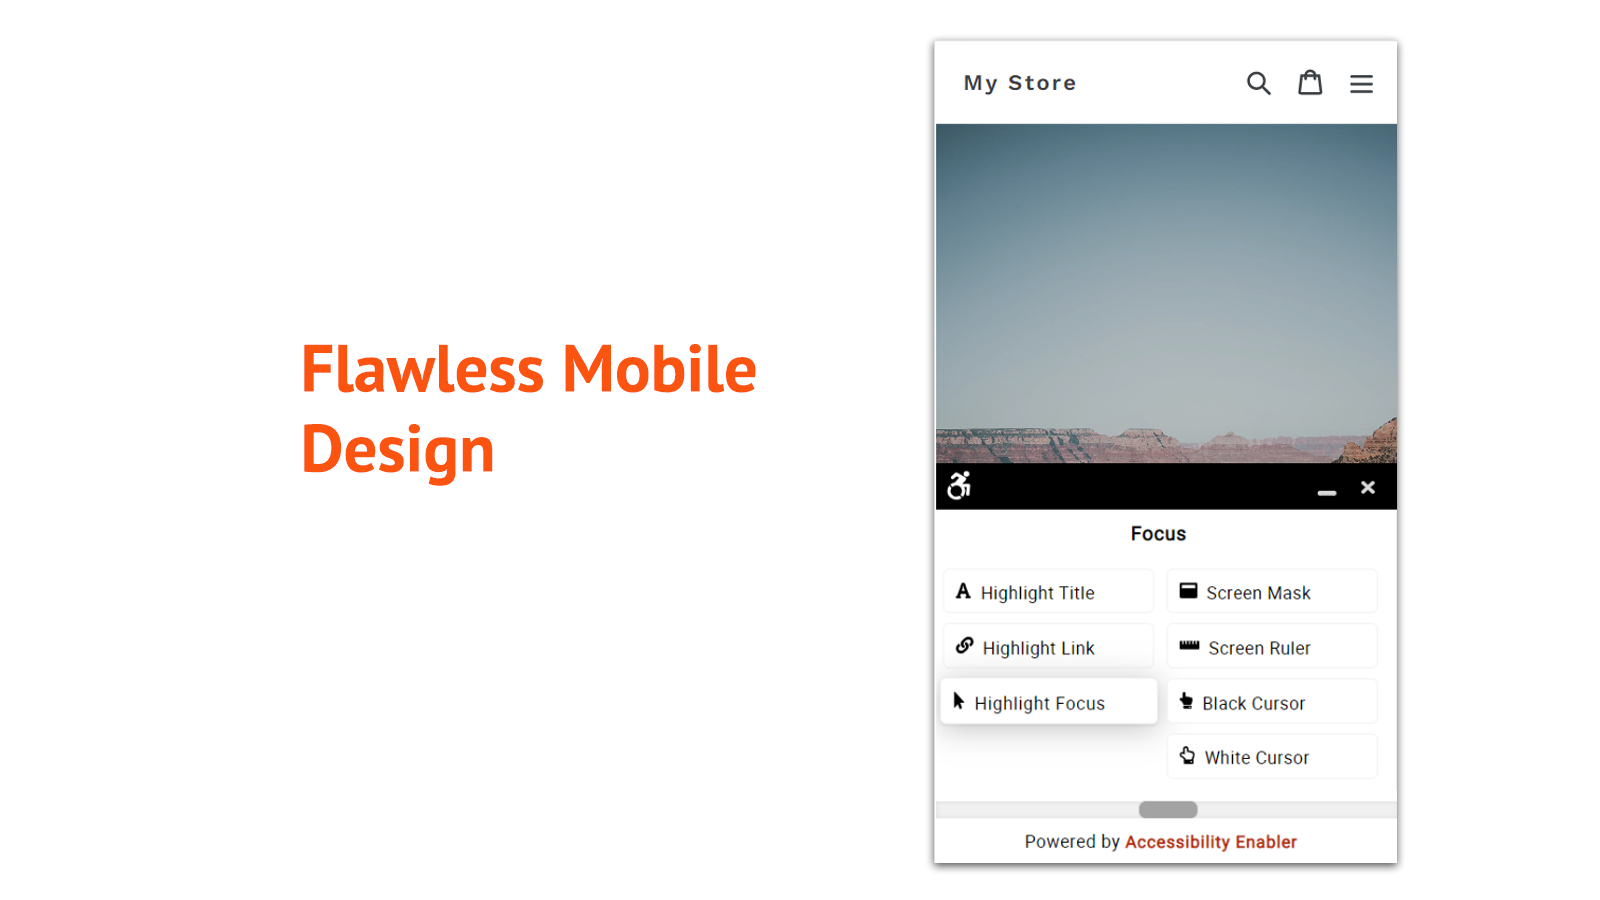 Flawless Mobile Design